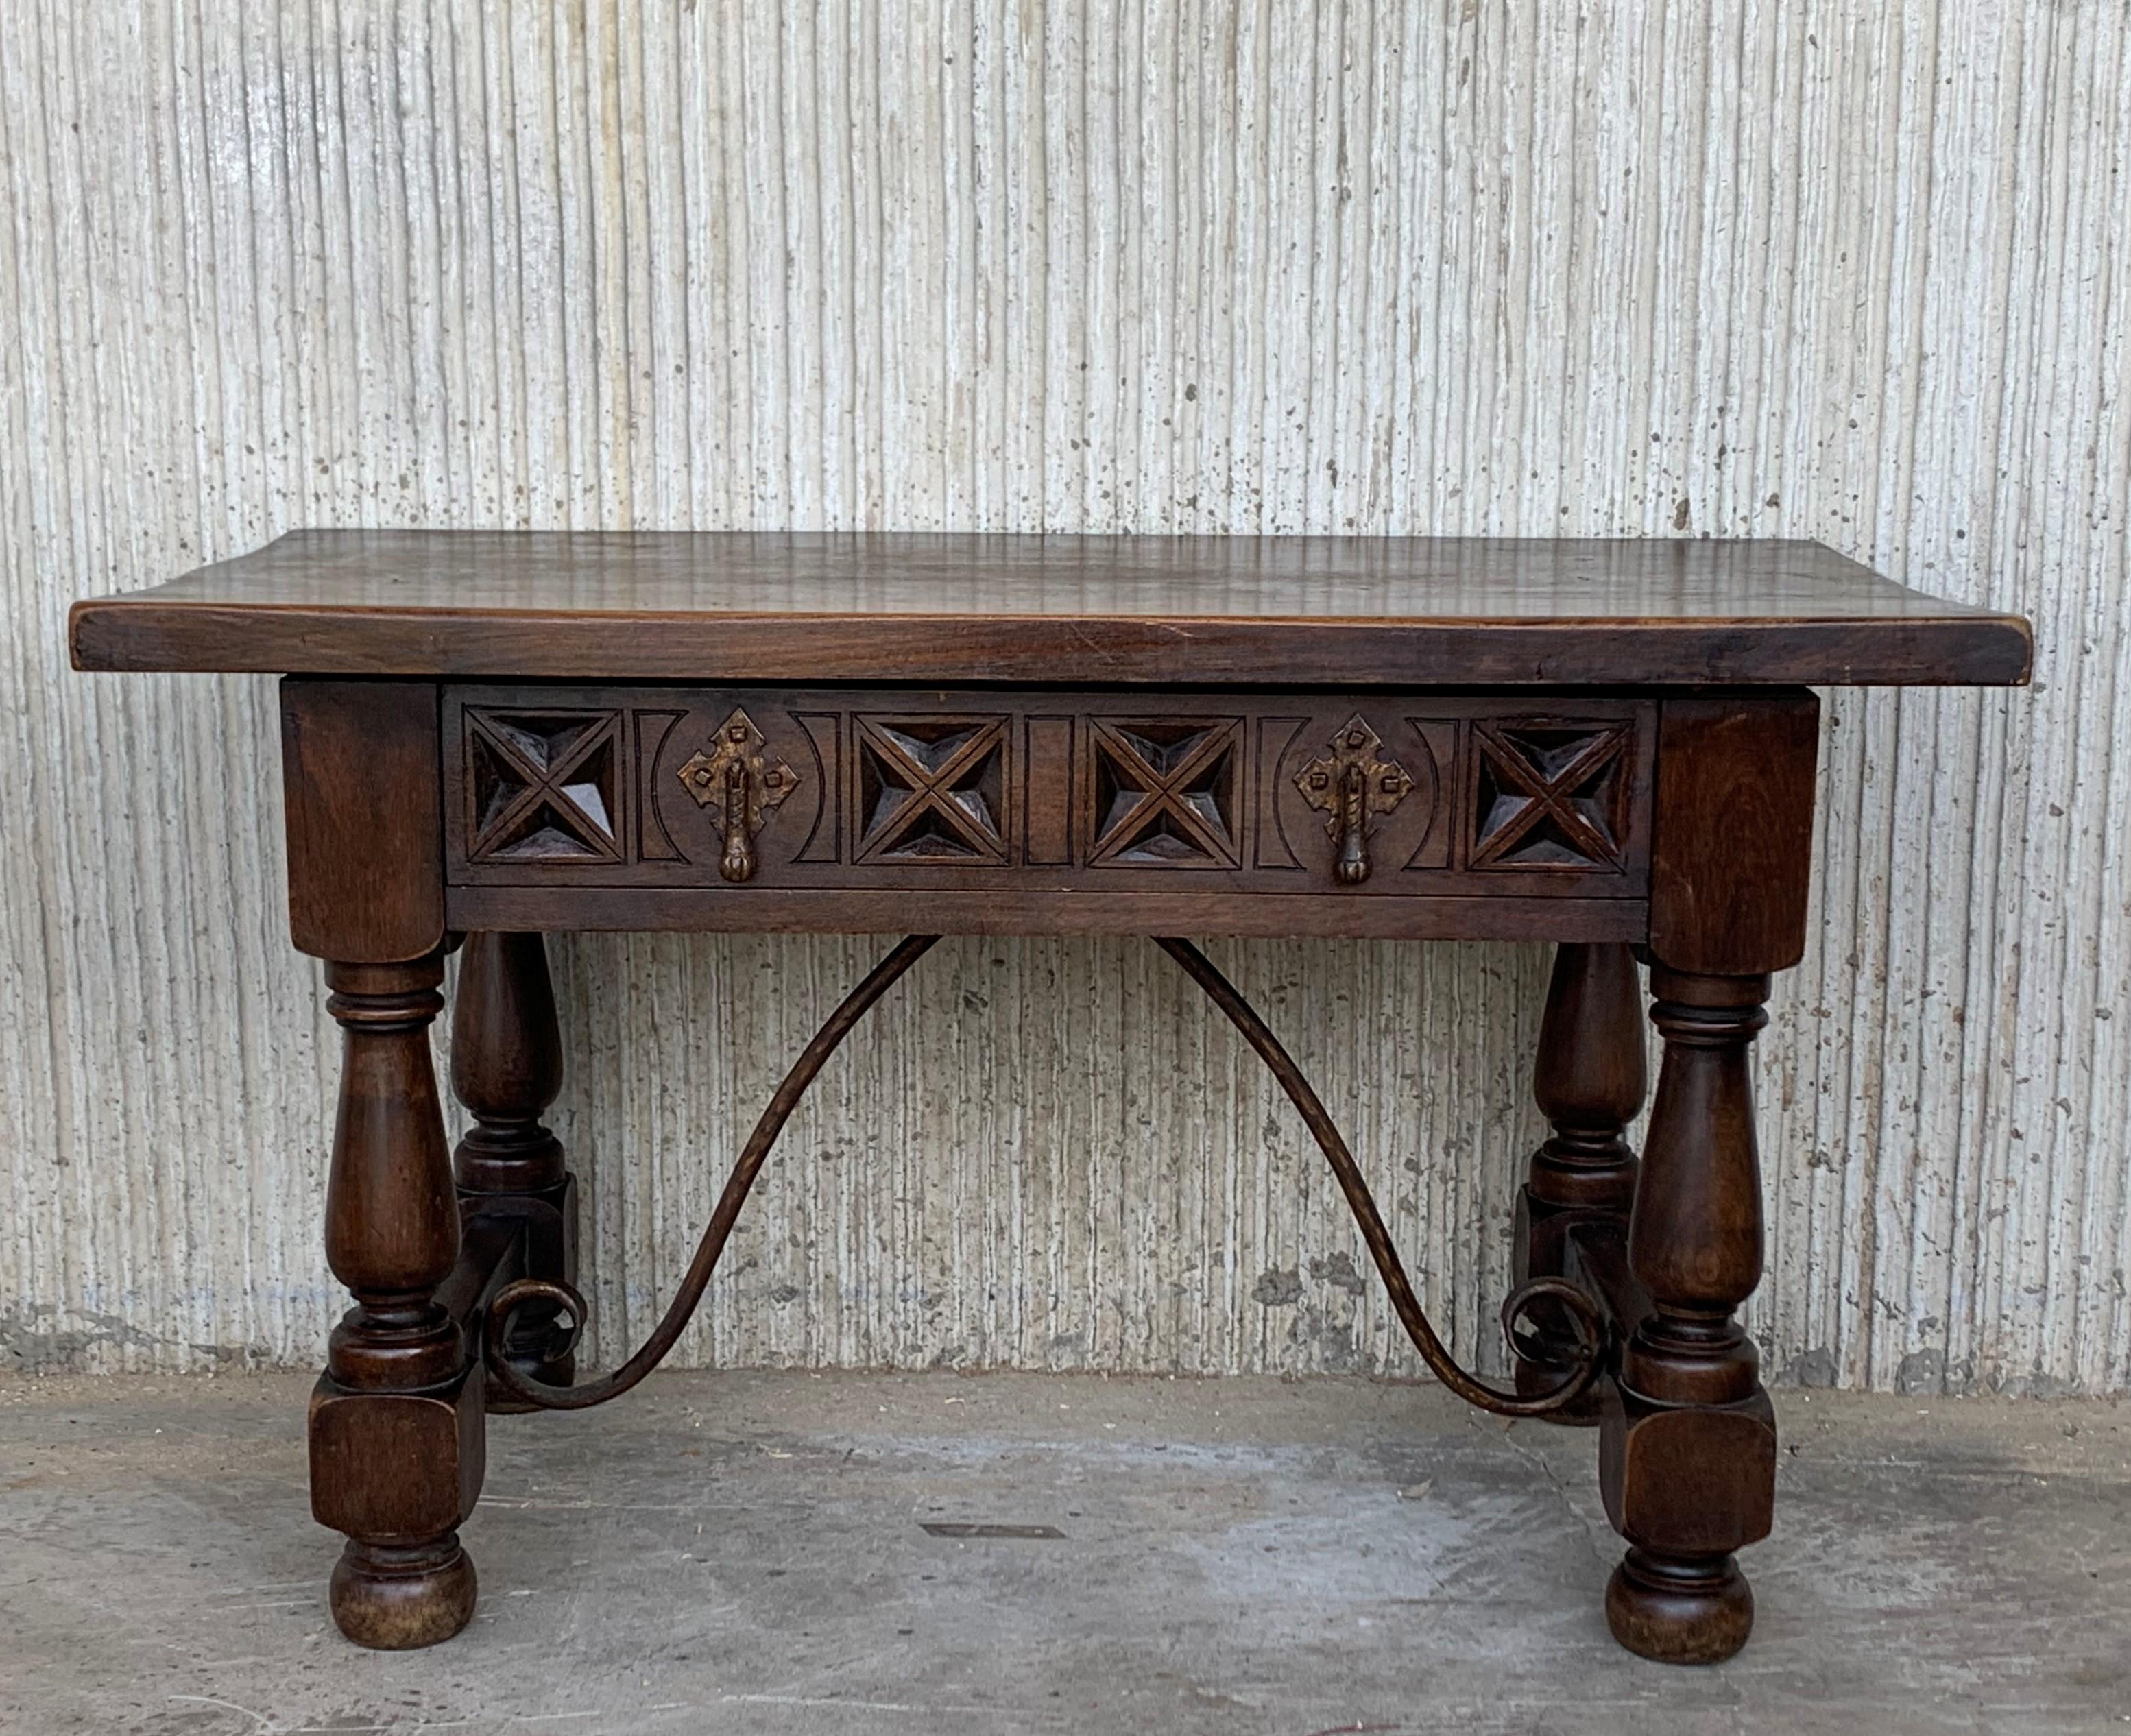 20th century Spanish farm table with wood columns stretchers, hand drawer and beautiful top

An unusual form with nice shiny patina. Nice size for a side or end table, or as a lamp table. Graceful carved drawers. The beautiful single drawer in